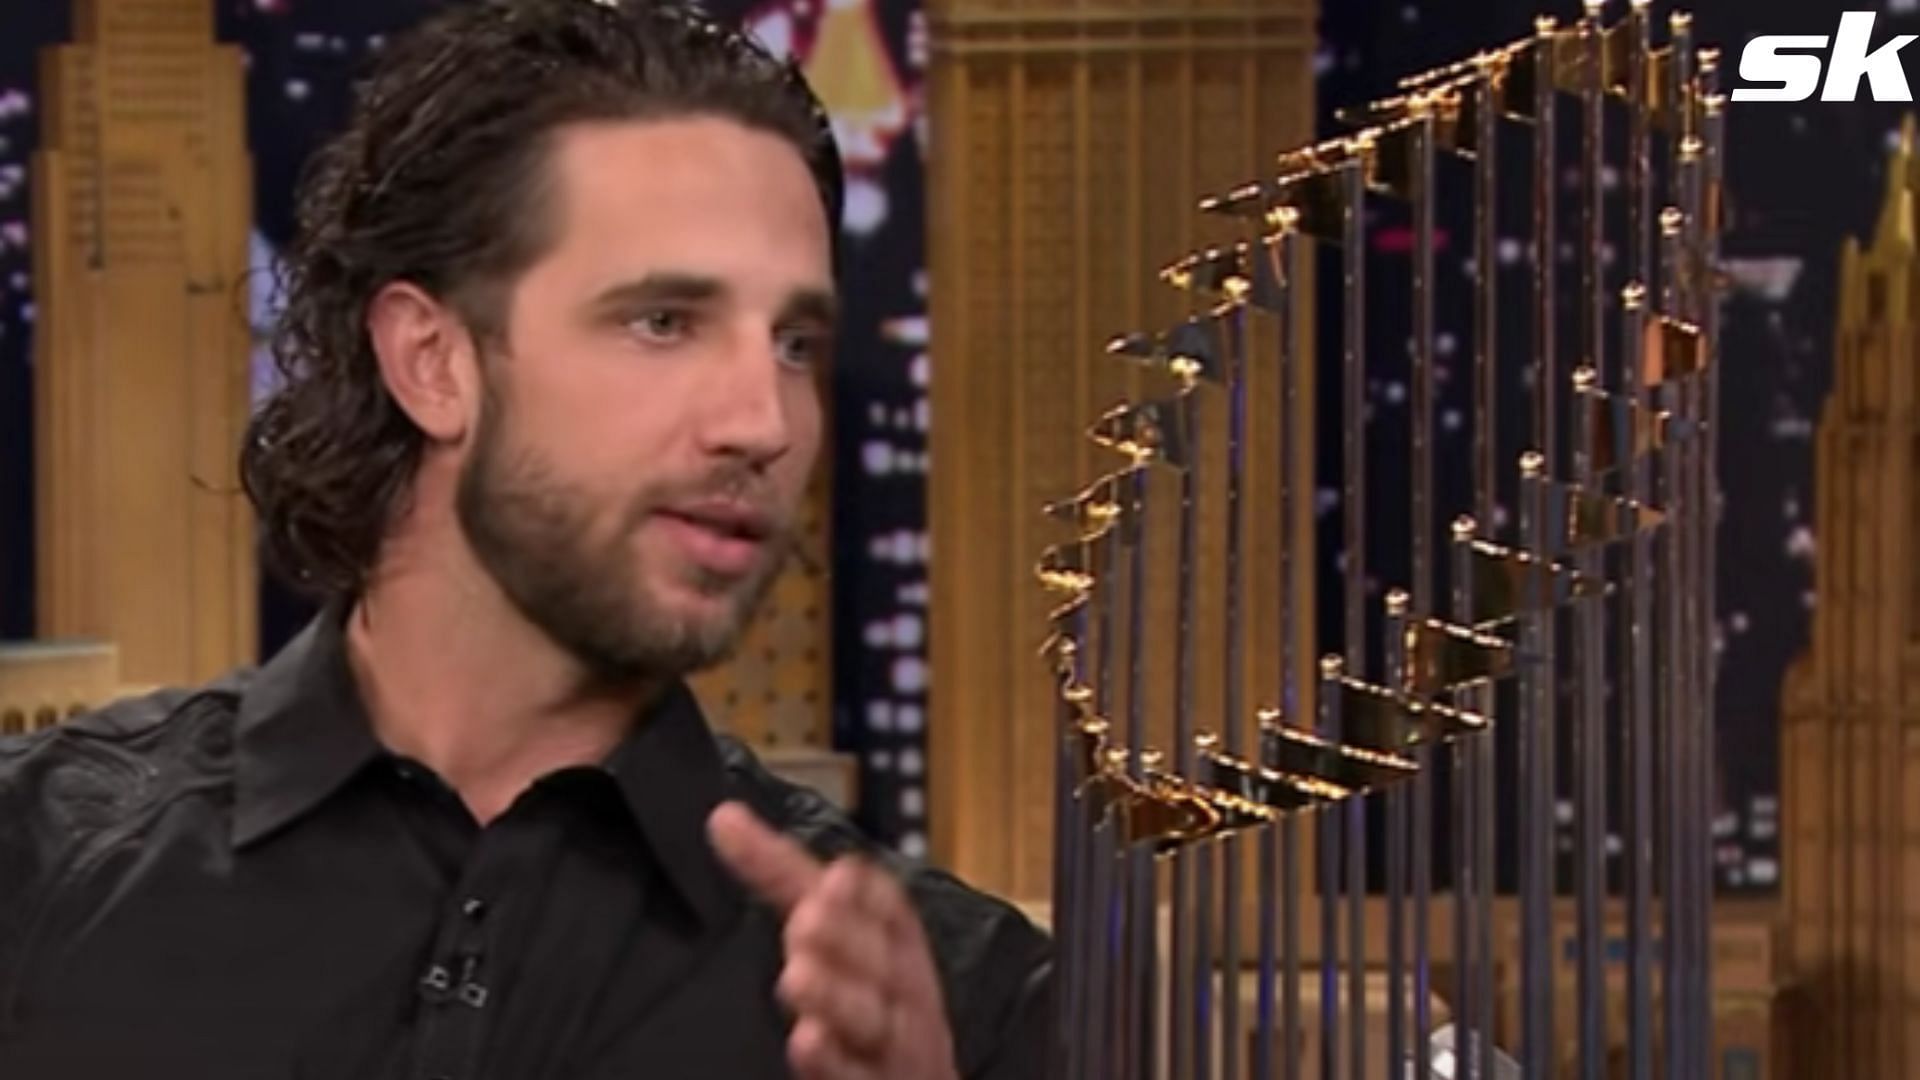 Madison Bumgarner revealed her took the 2014 World Series trophy with him wherever he traveled